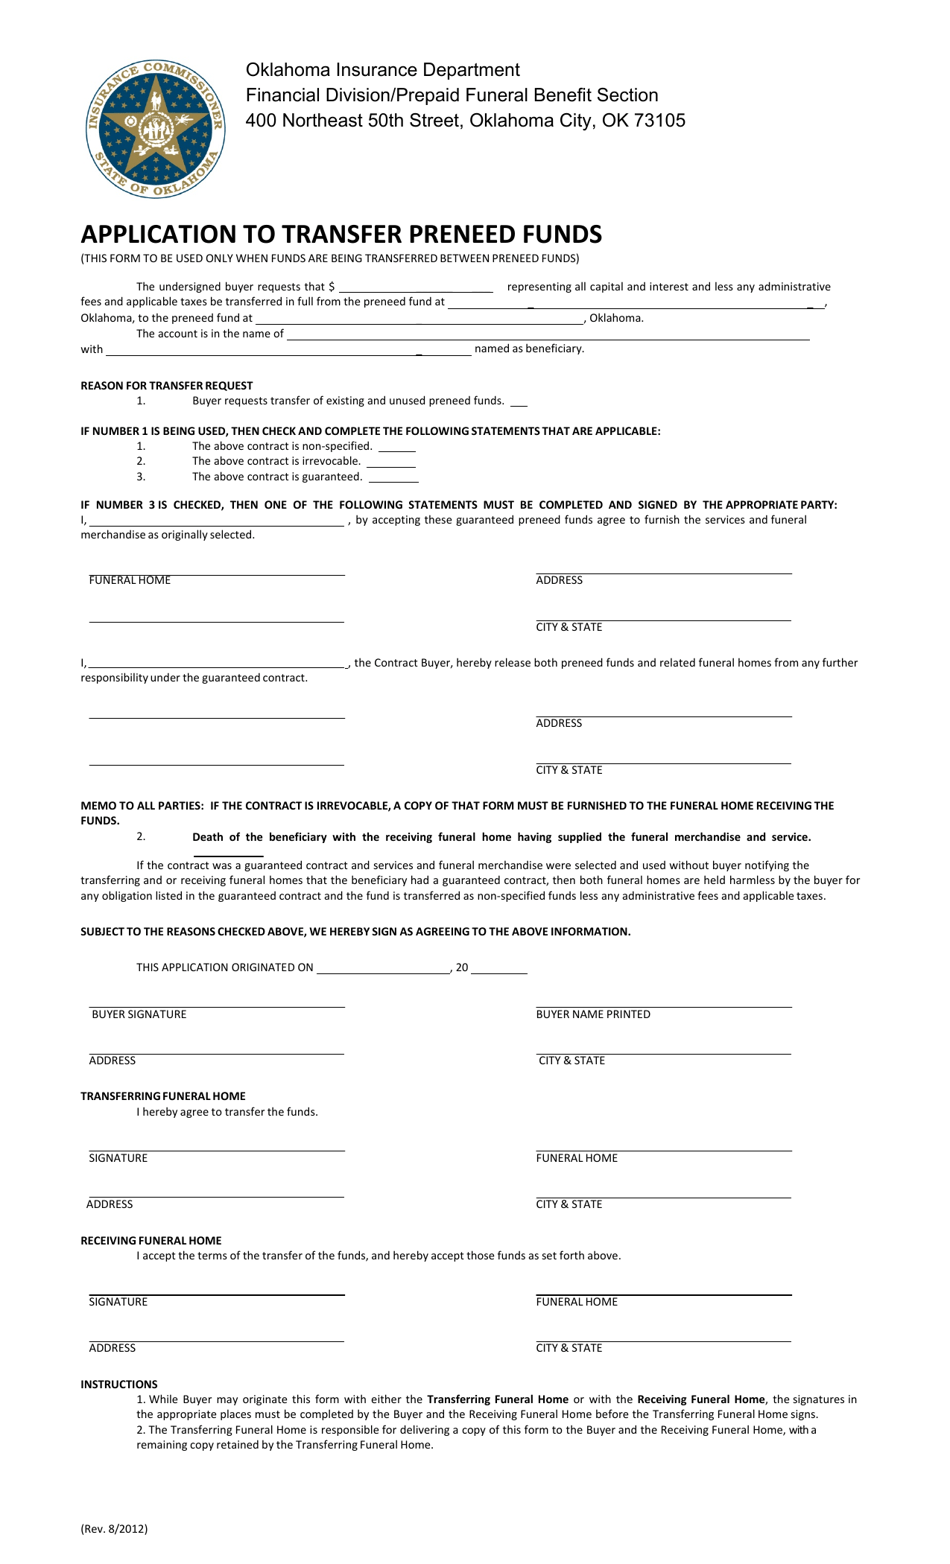 Application to Transfer Preneed Funds - Oklahoma, Page 1